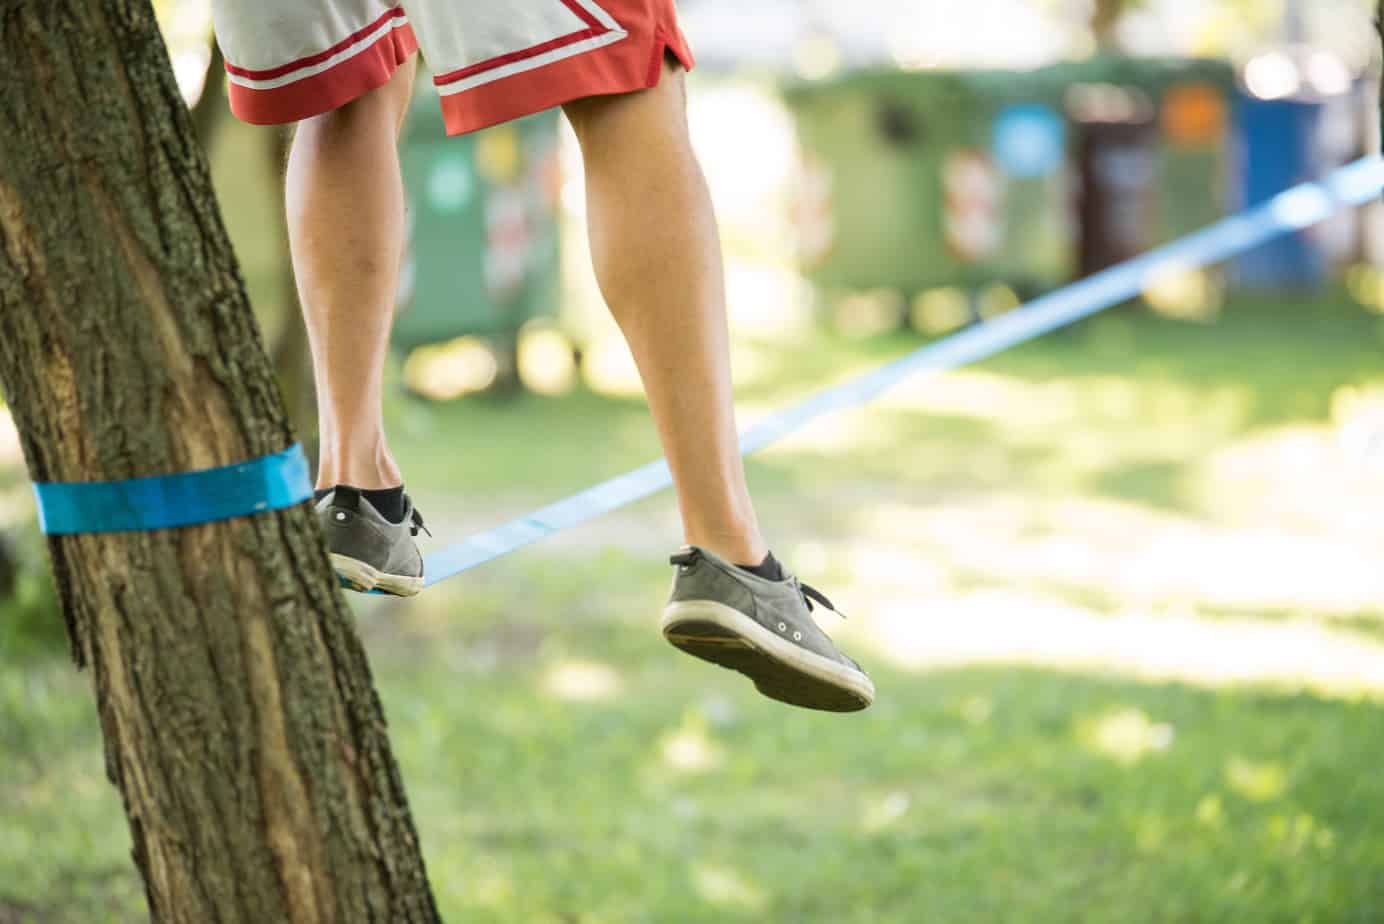 How Can You Damage Your Slackline? (Prevention)